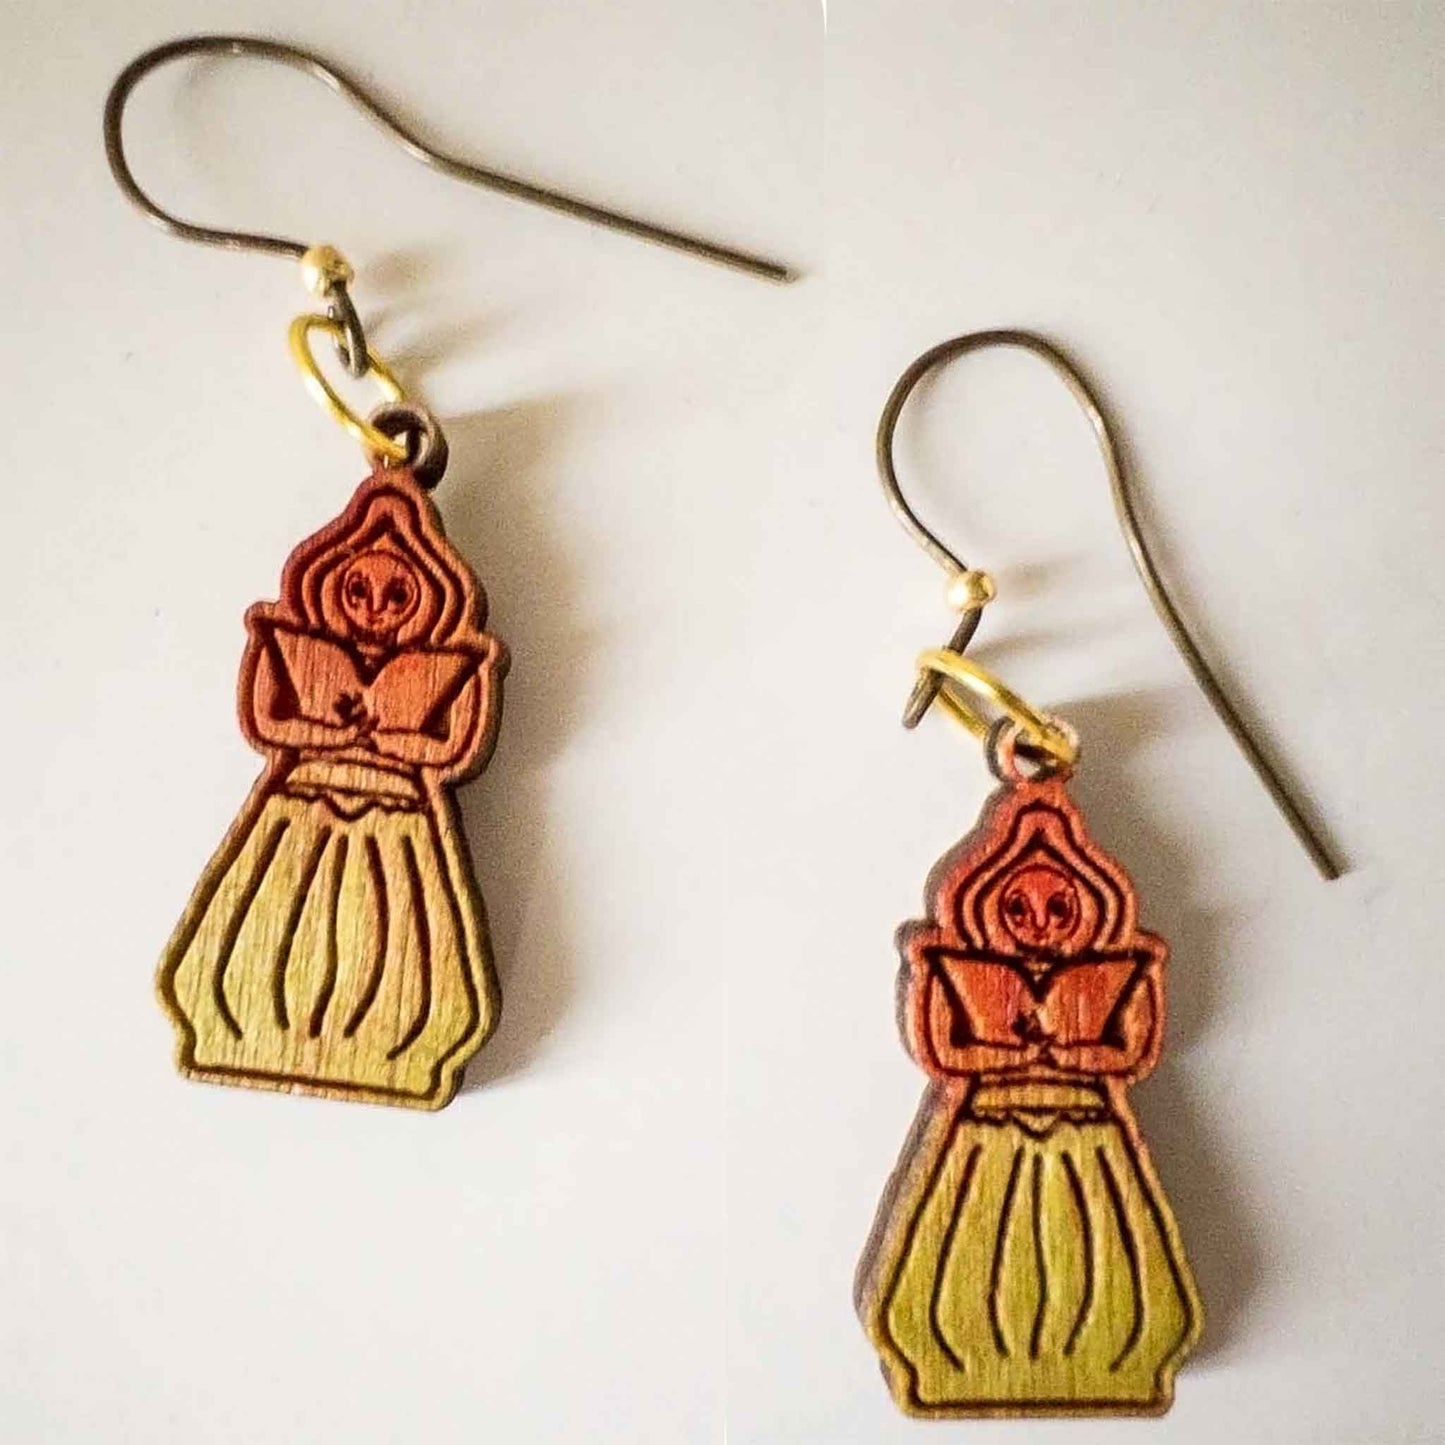 Flatwoods Monster Cryptid Earrings in Red Green